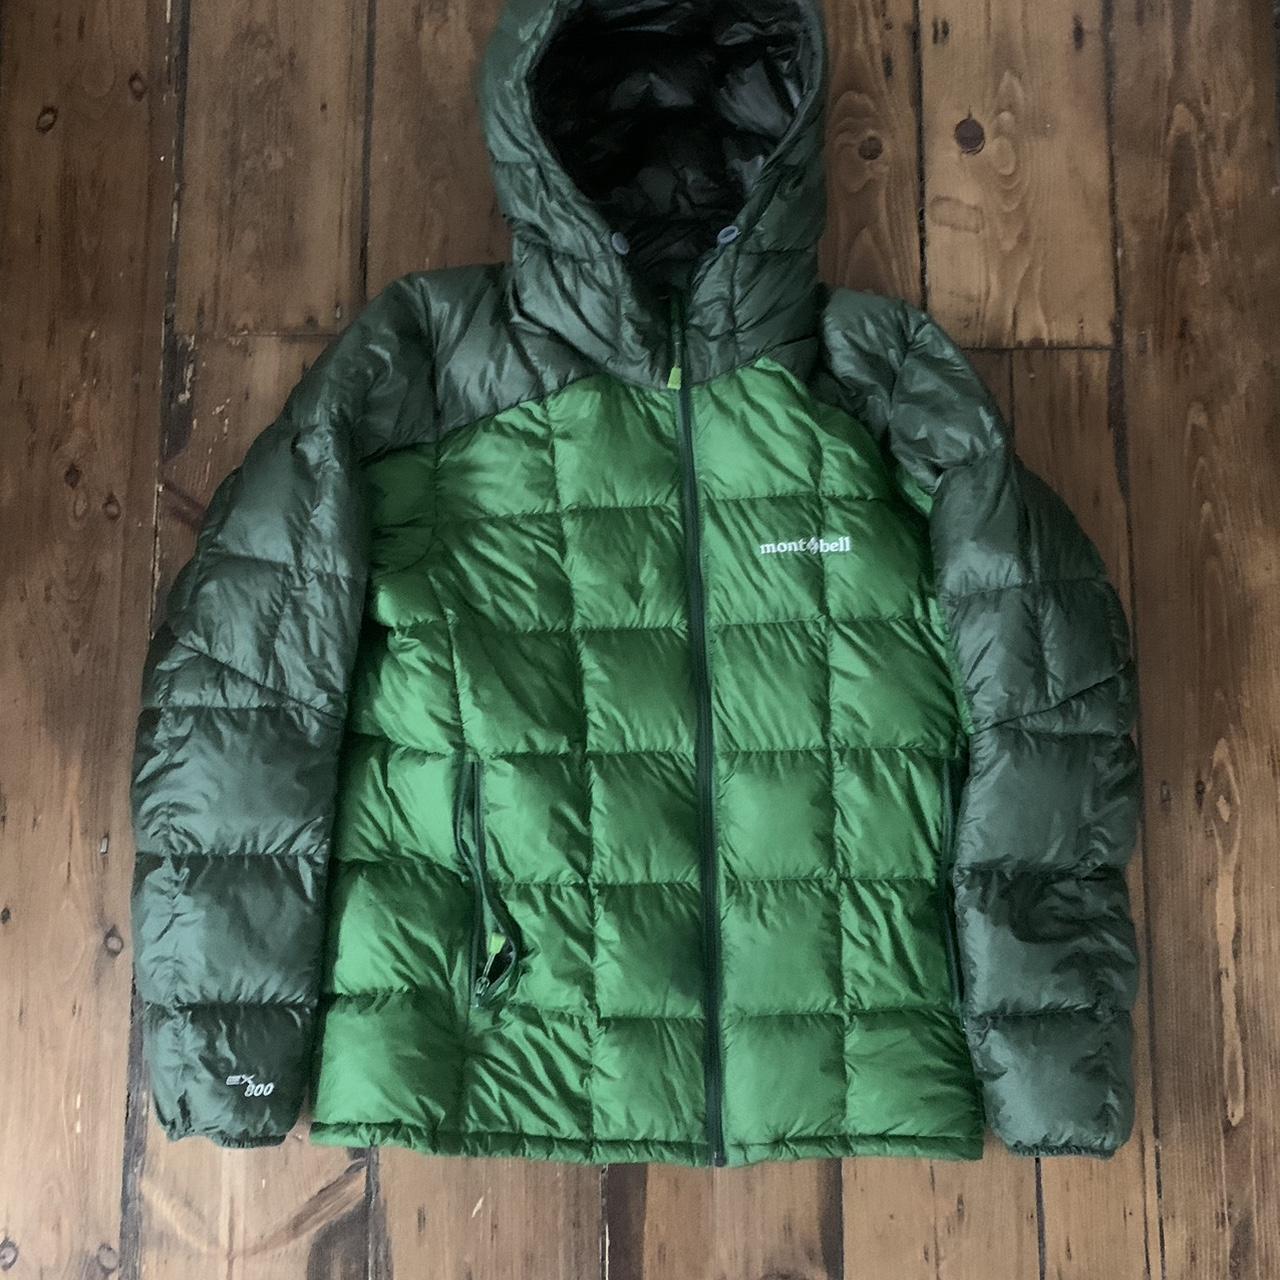 Small Two Tone Green / Khaki Montbell Down Puffer... - Depop